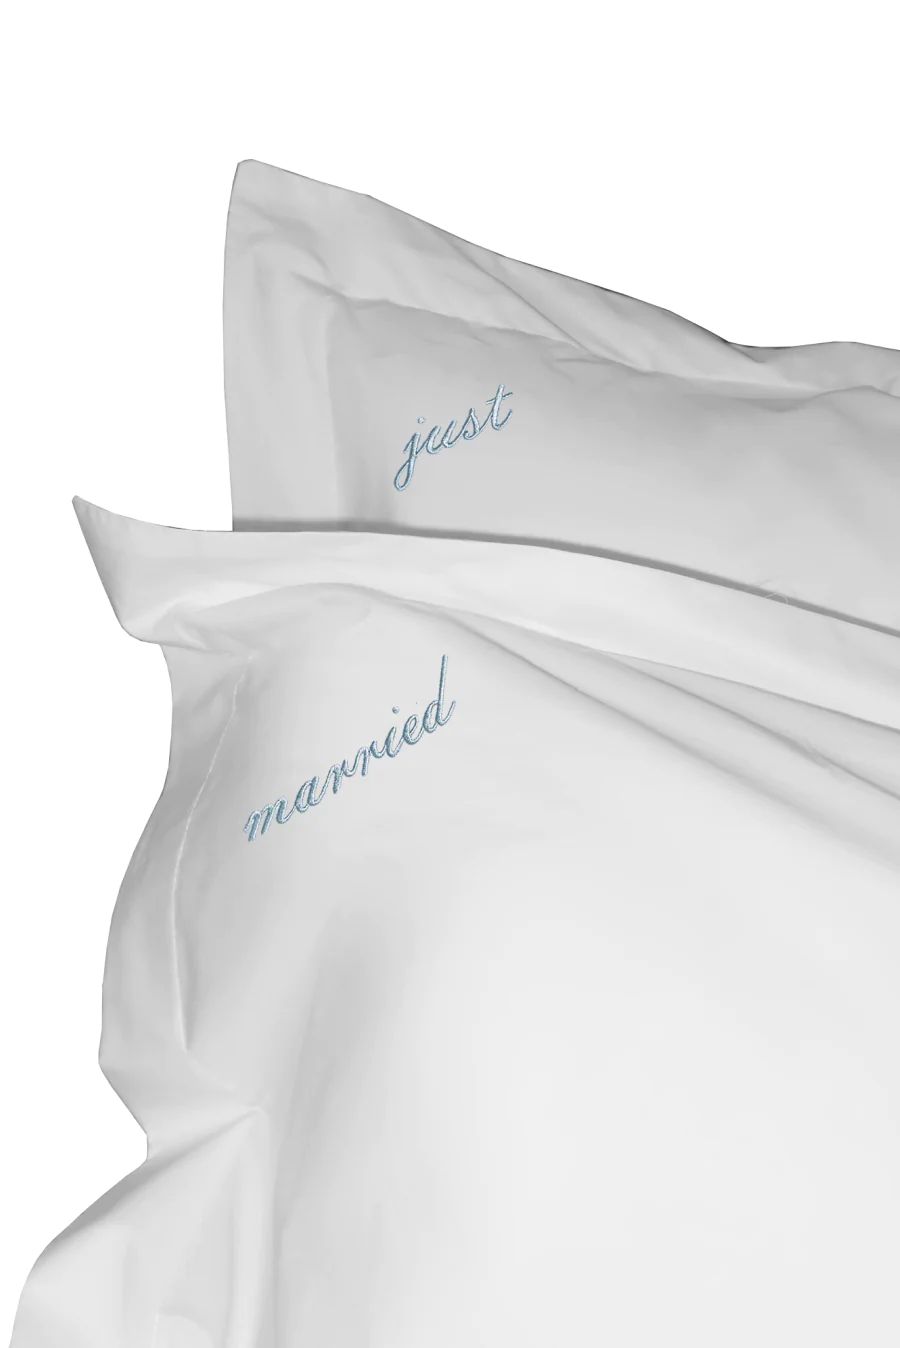 "JUST MARRIED" PILLOW CASE SET BLANC/CIELO | The Bar